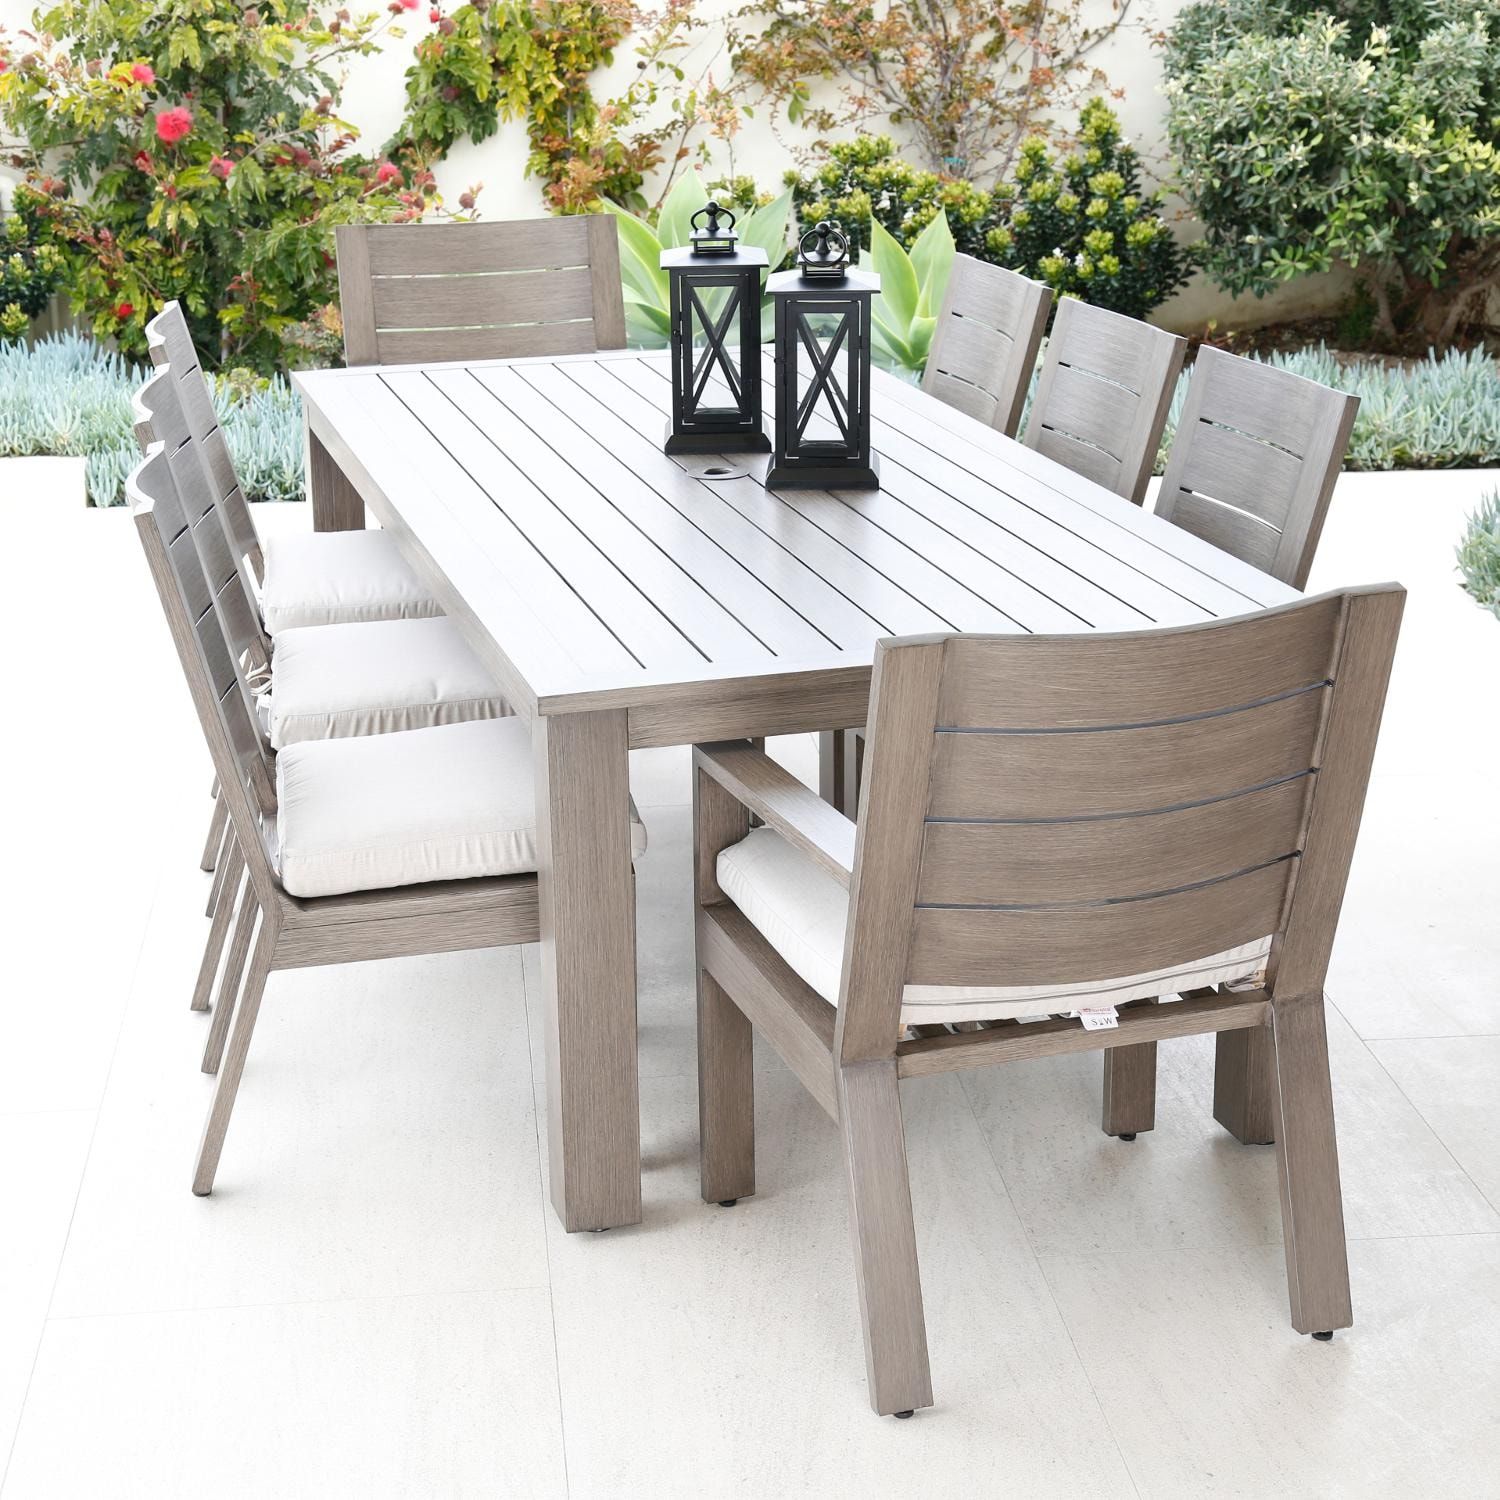 Laguna 9 Piece Aluminum Patio Dining Set W/ 90 X 42 Inch Rectangular Intended For Large Rectangular Patio Dining Sets (View 9 of 15)